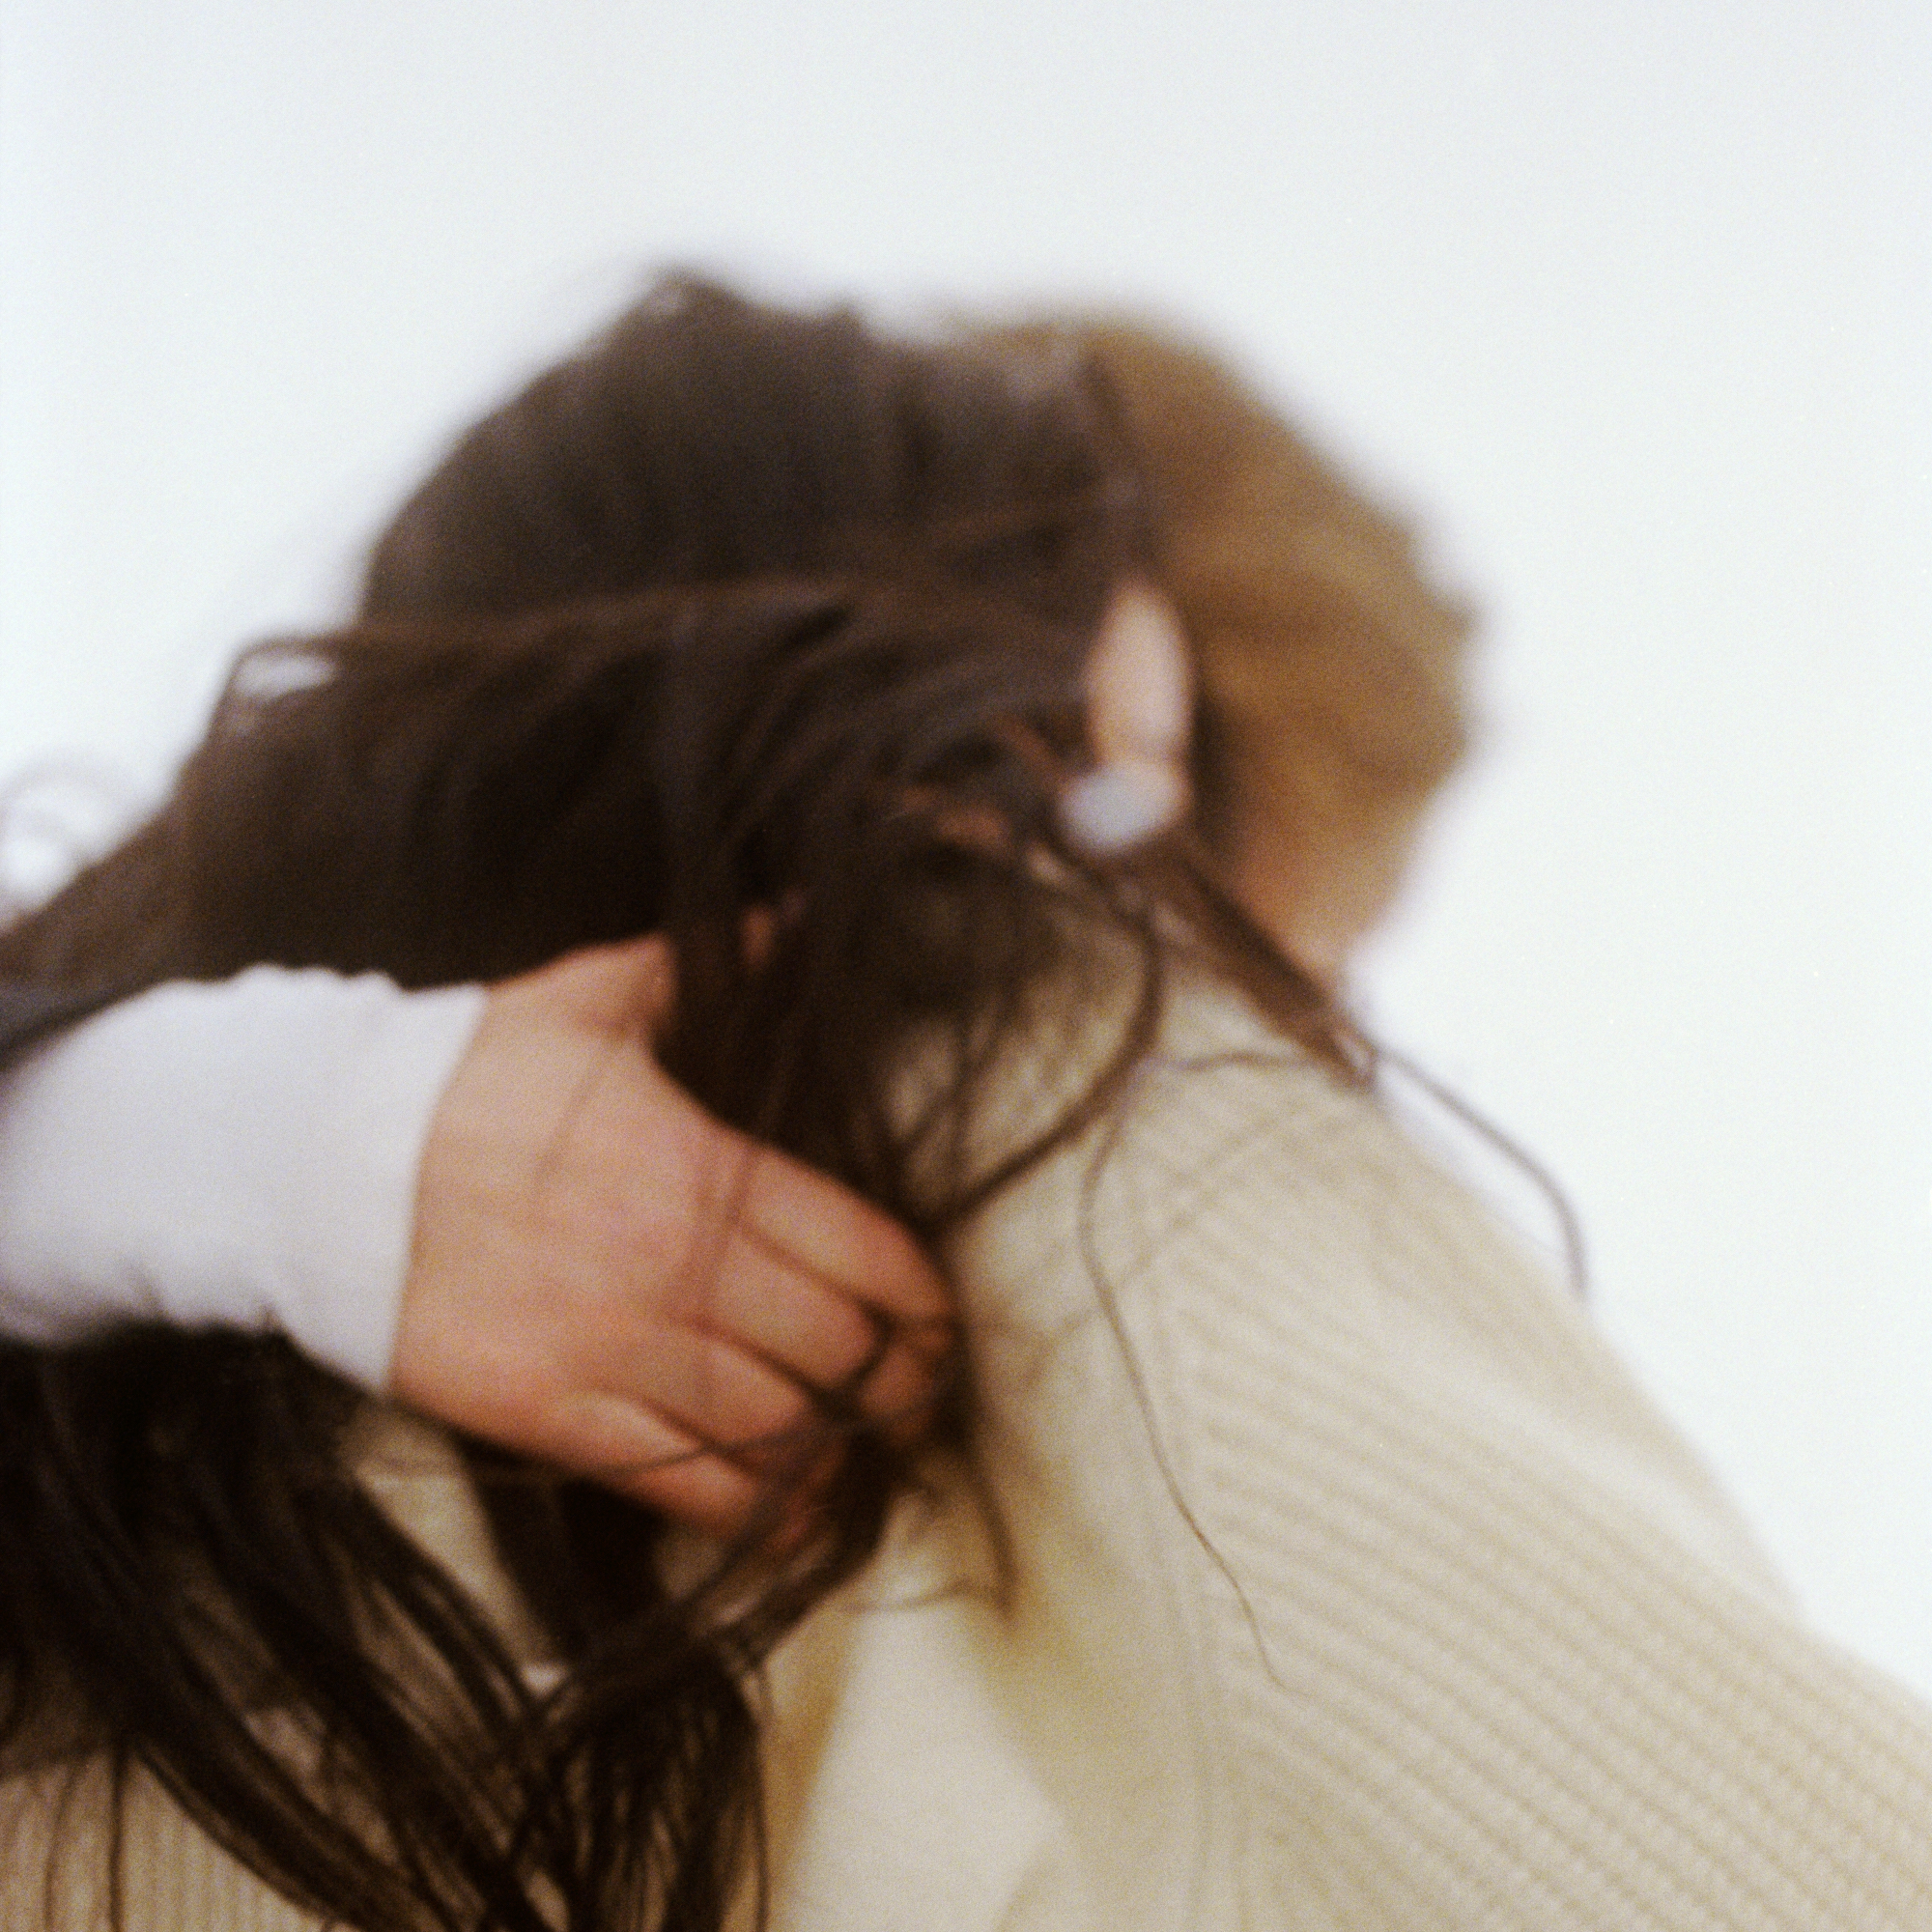 Two people with long hair holding eachother